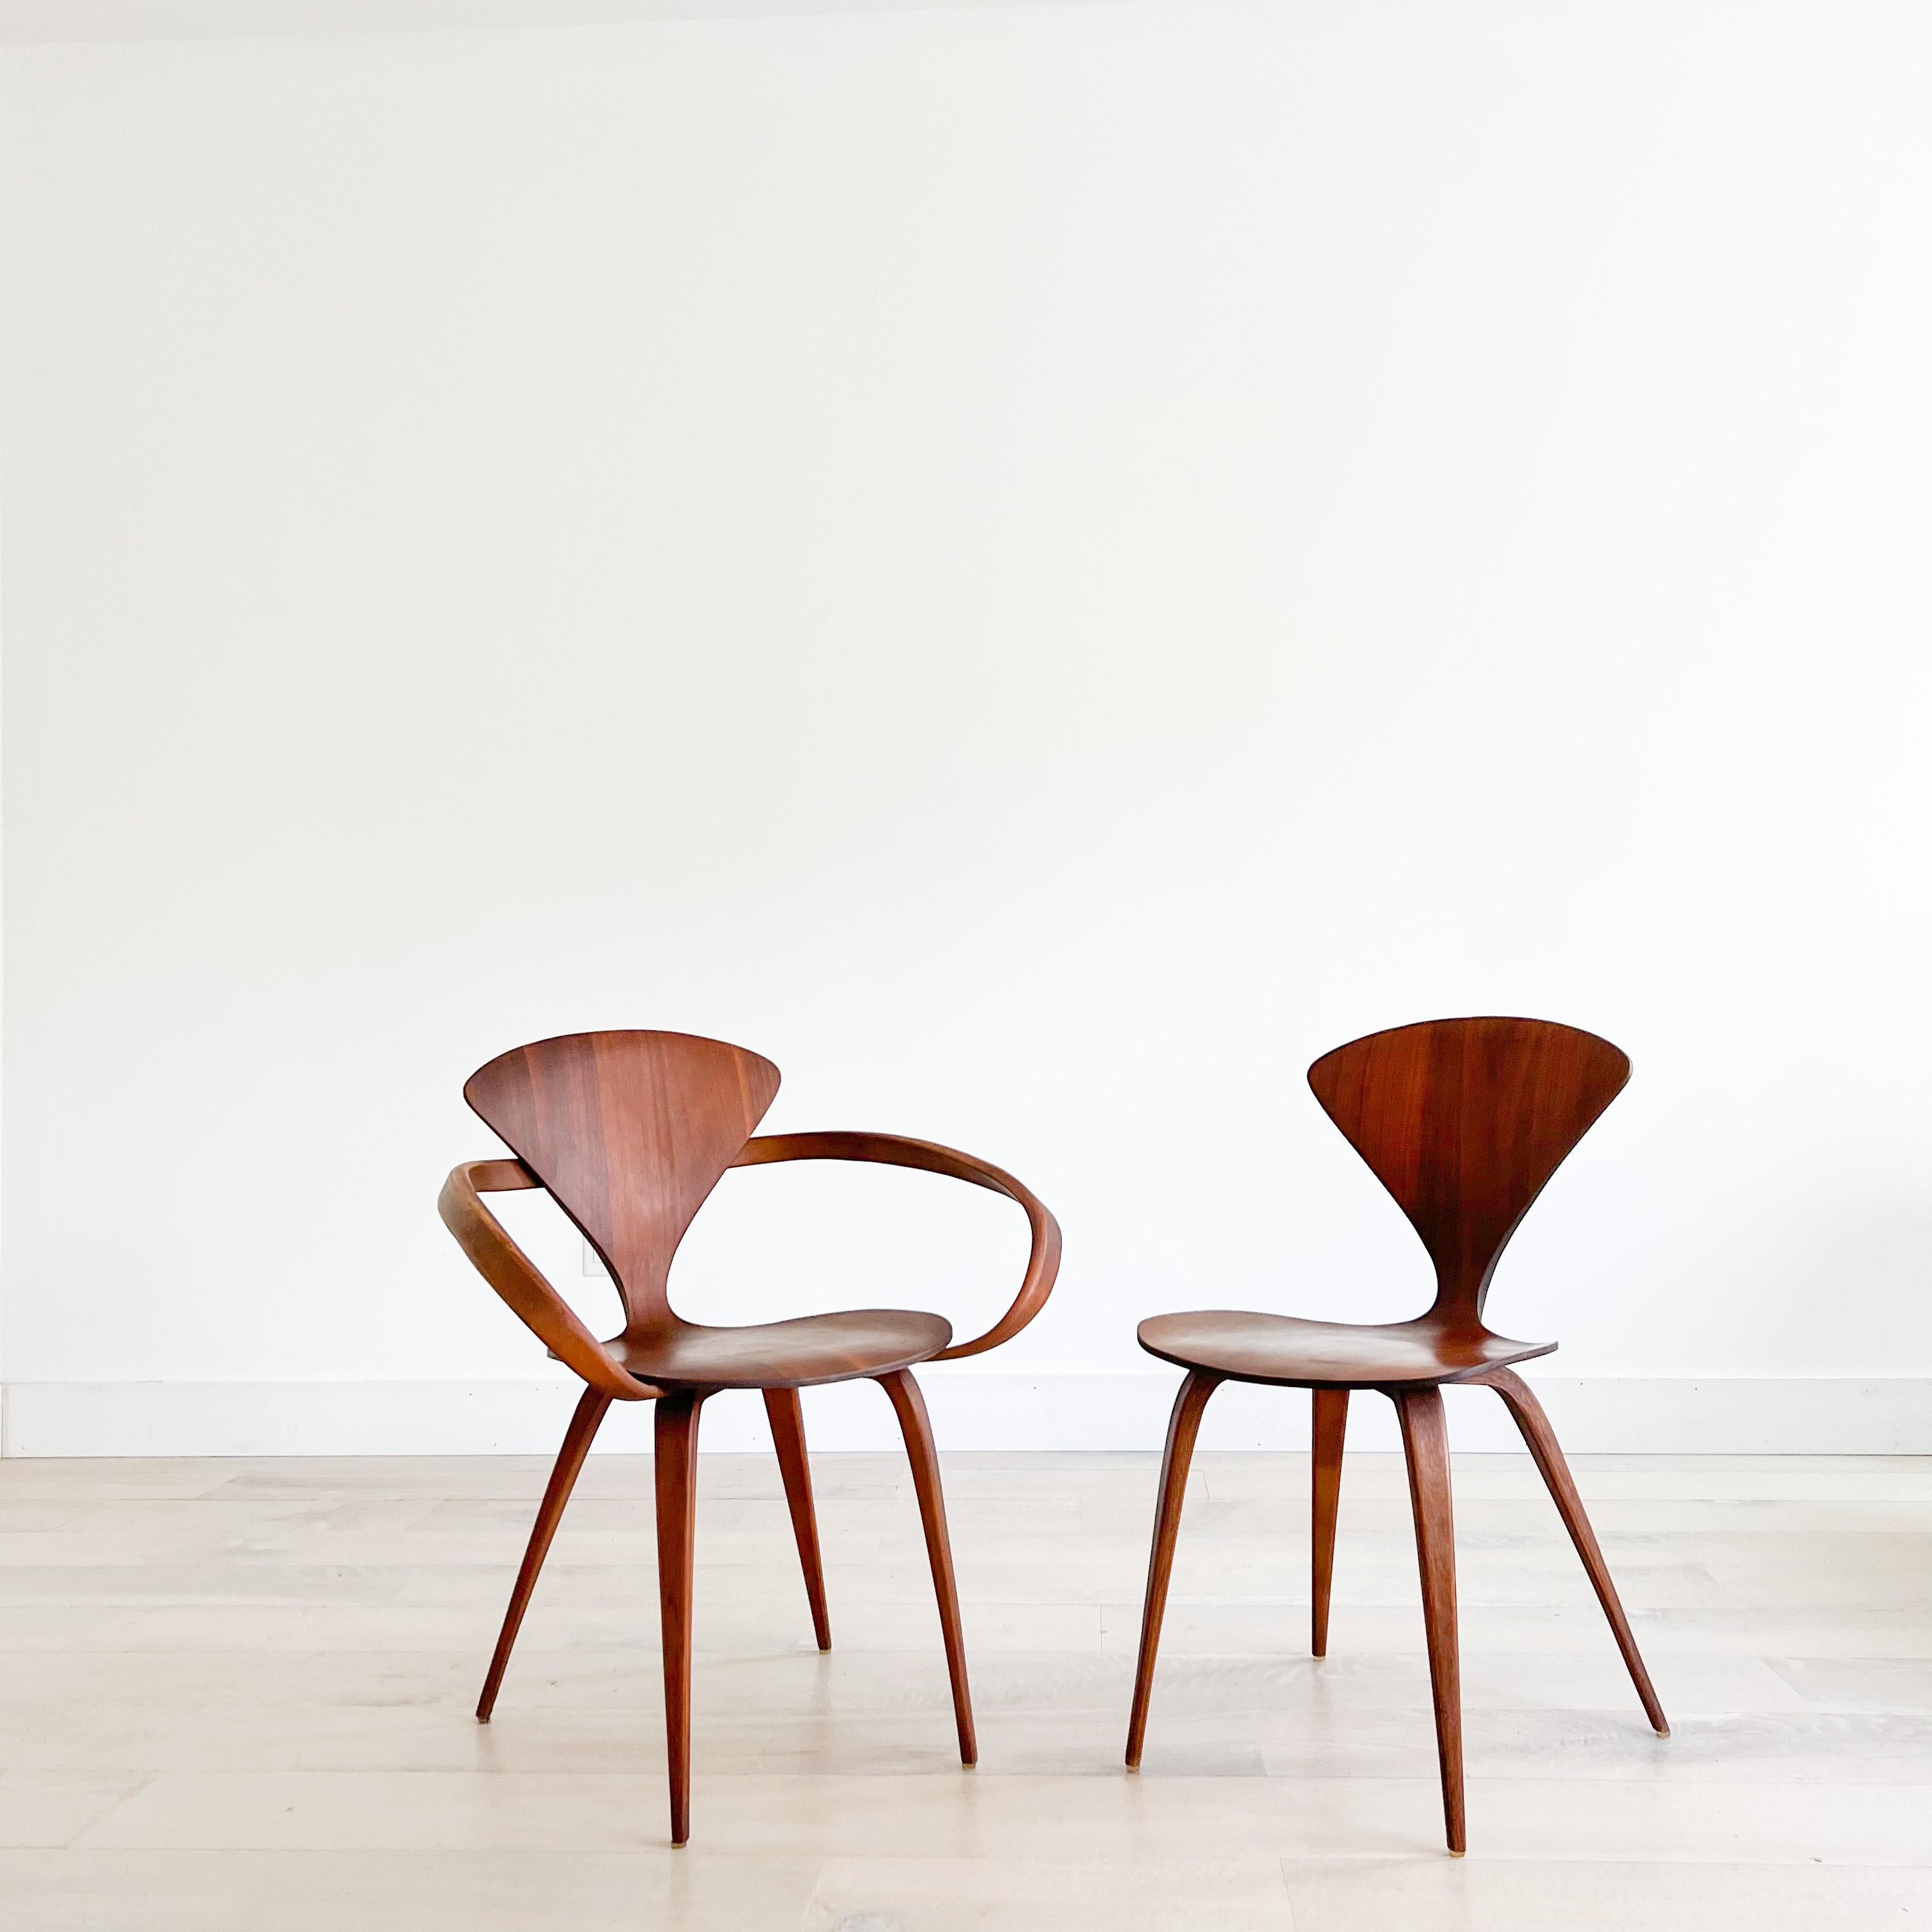 Pair of “pretzel” walnut chairs designed by Norman Cherner for Plycraft. One armless and one armchair. Some light scuffing/scratching/small areas of veneer repair from age appropriate wear.